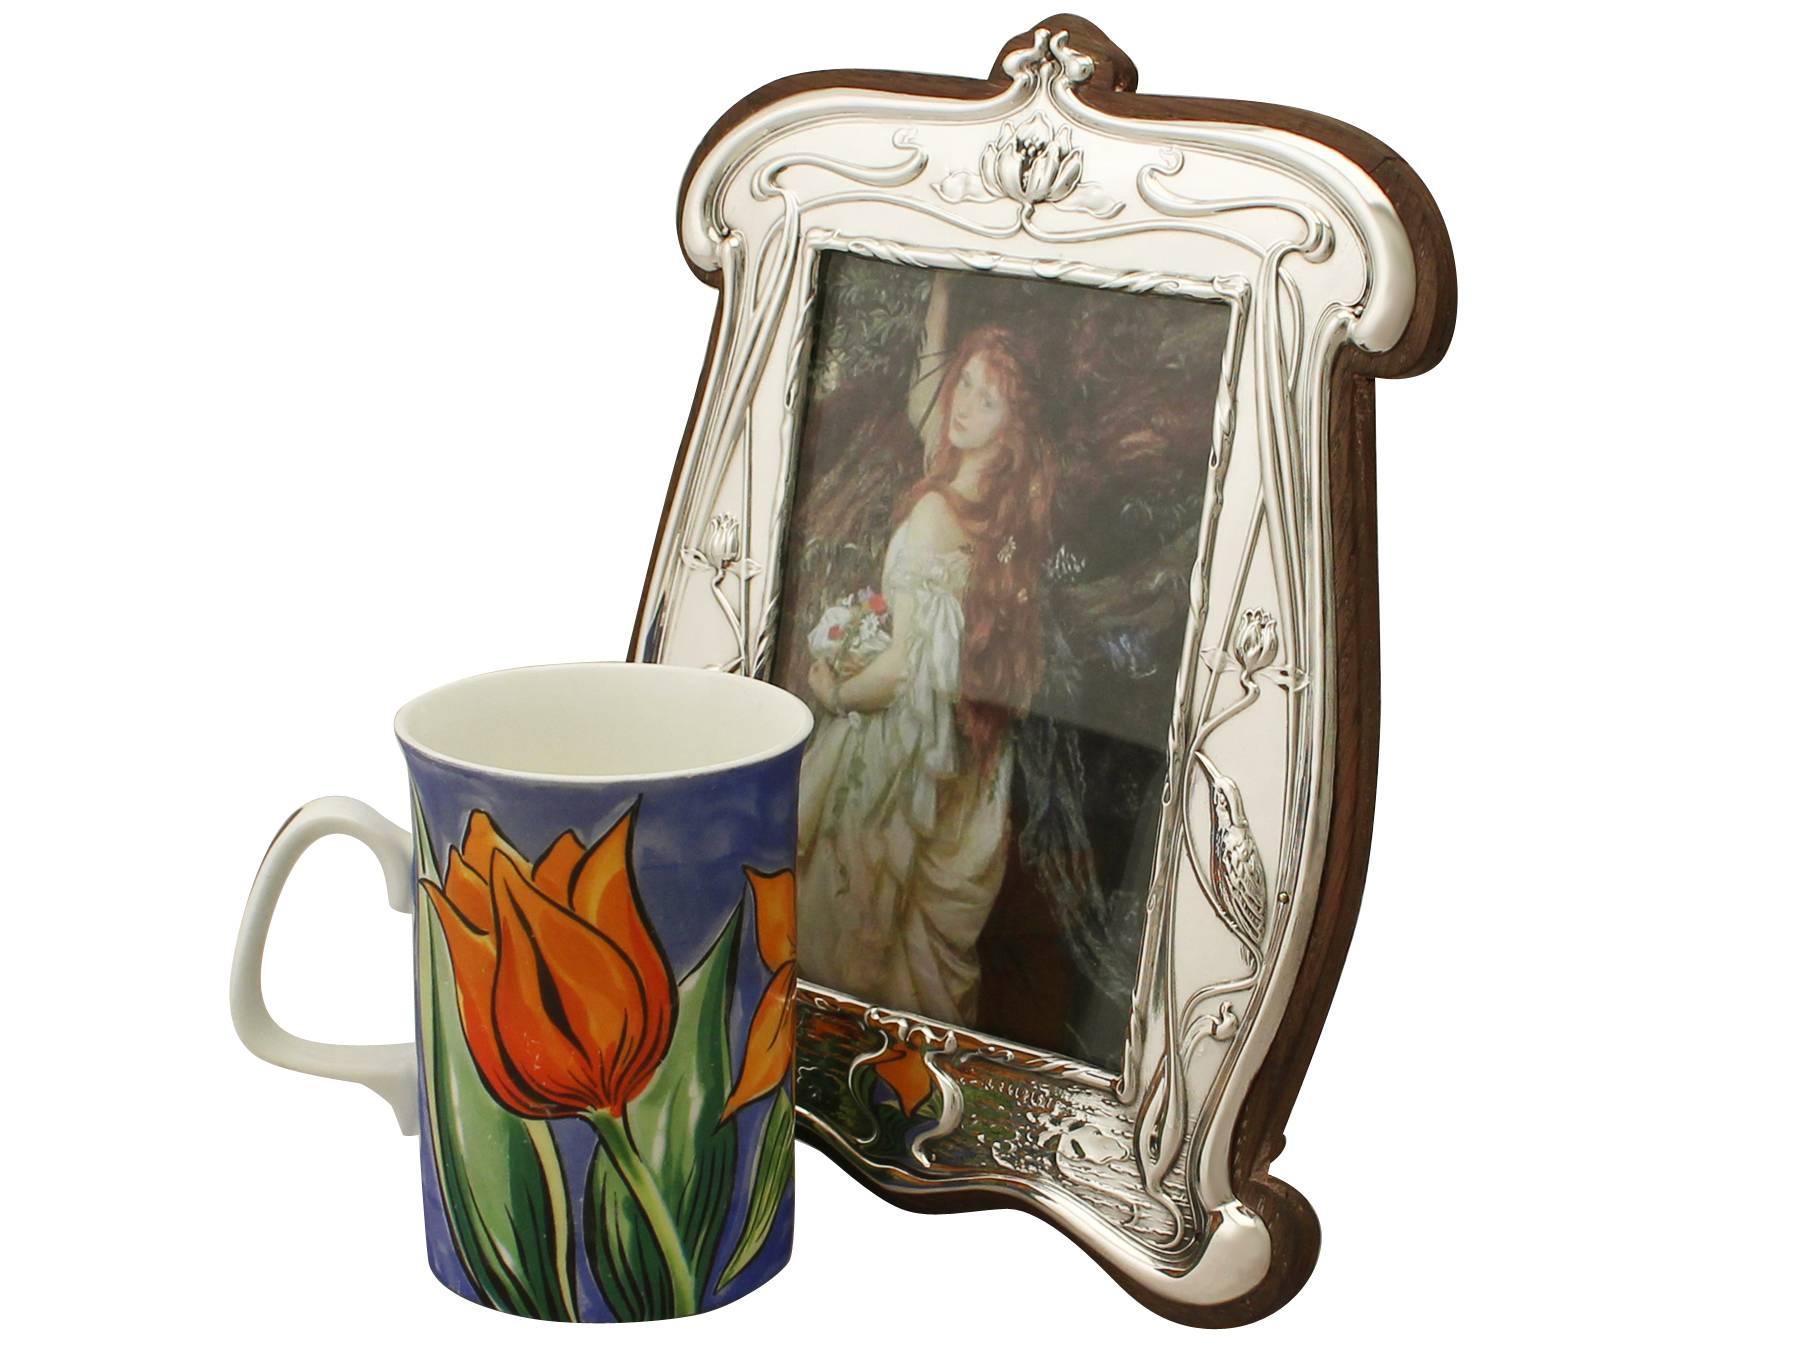 An exceptional, fine and impressive antique Edwardian English sterling silver photograph frame in the Art Nouveau style; an addition to our ornamental silverware collection

This exceptional antique Edwardian sterling silver photograph frame has a